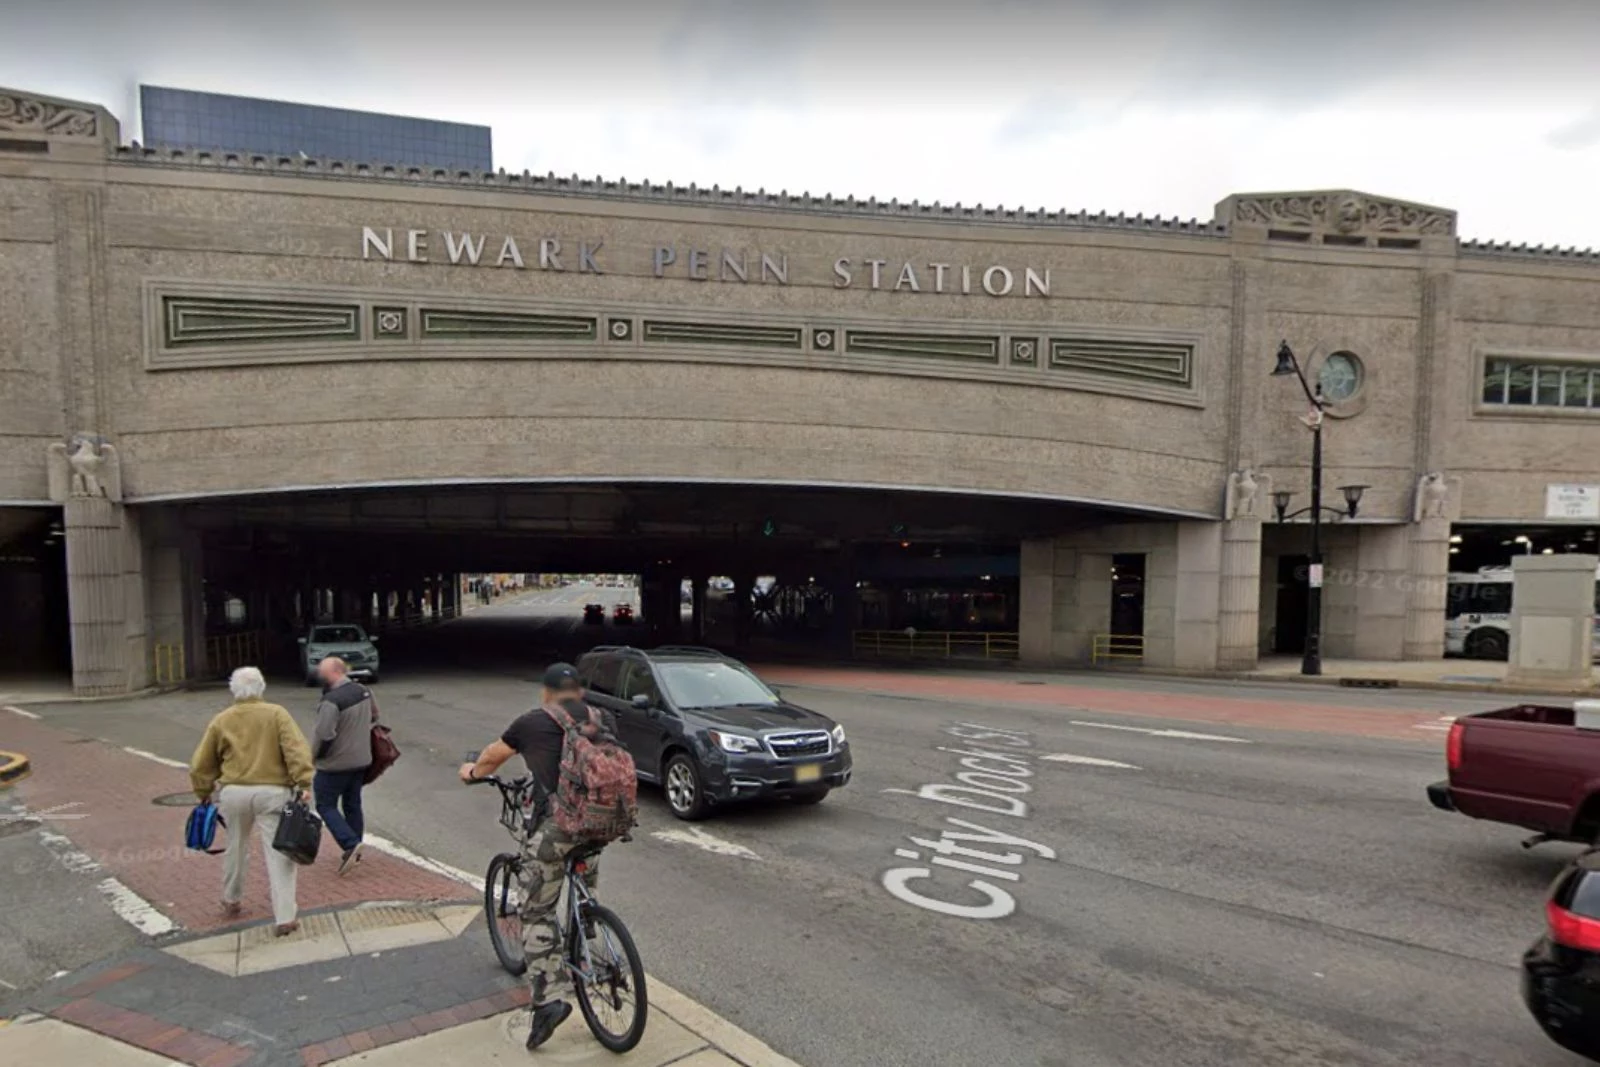 It will soon be cooling down for NJ riders at Newark Penn Station